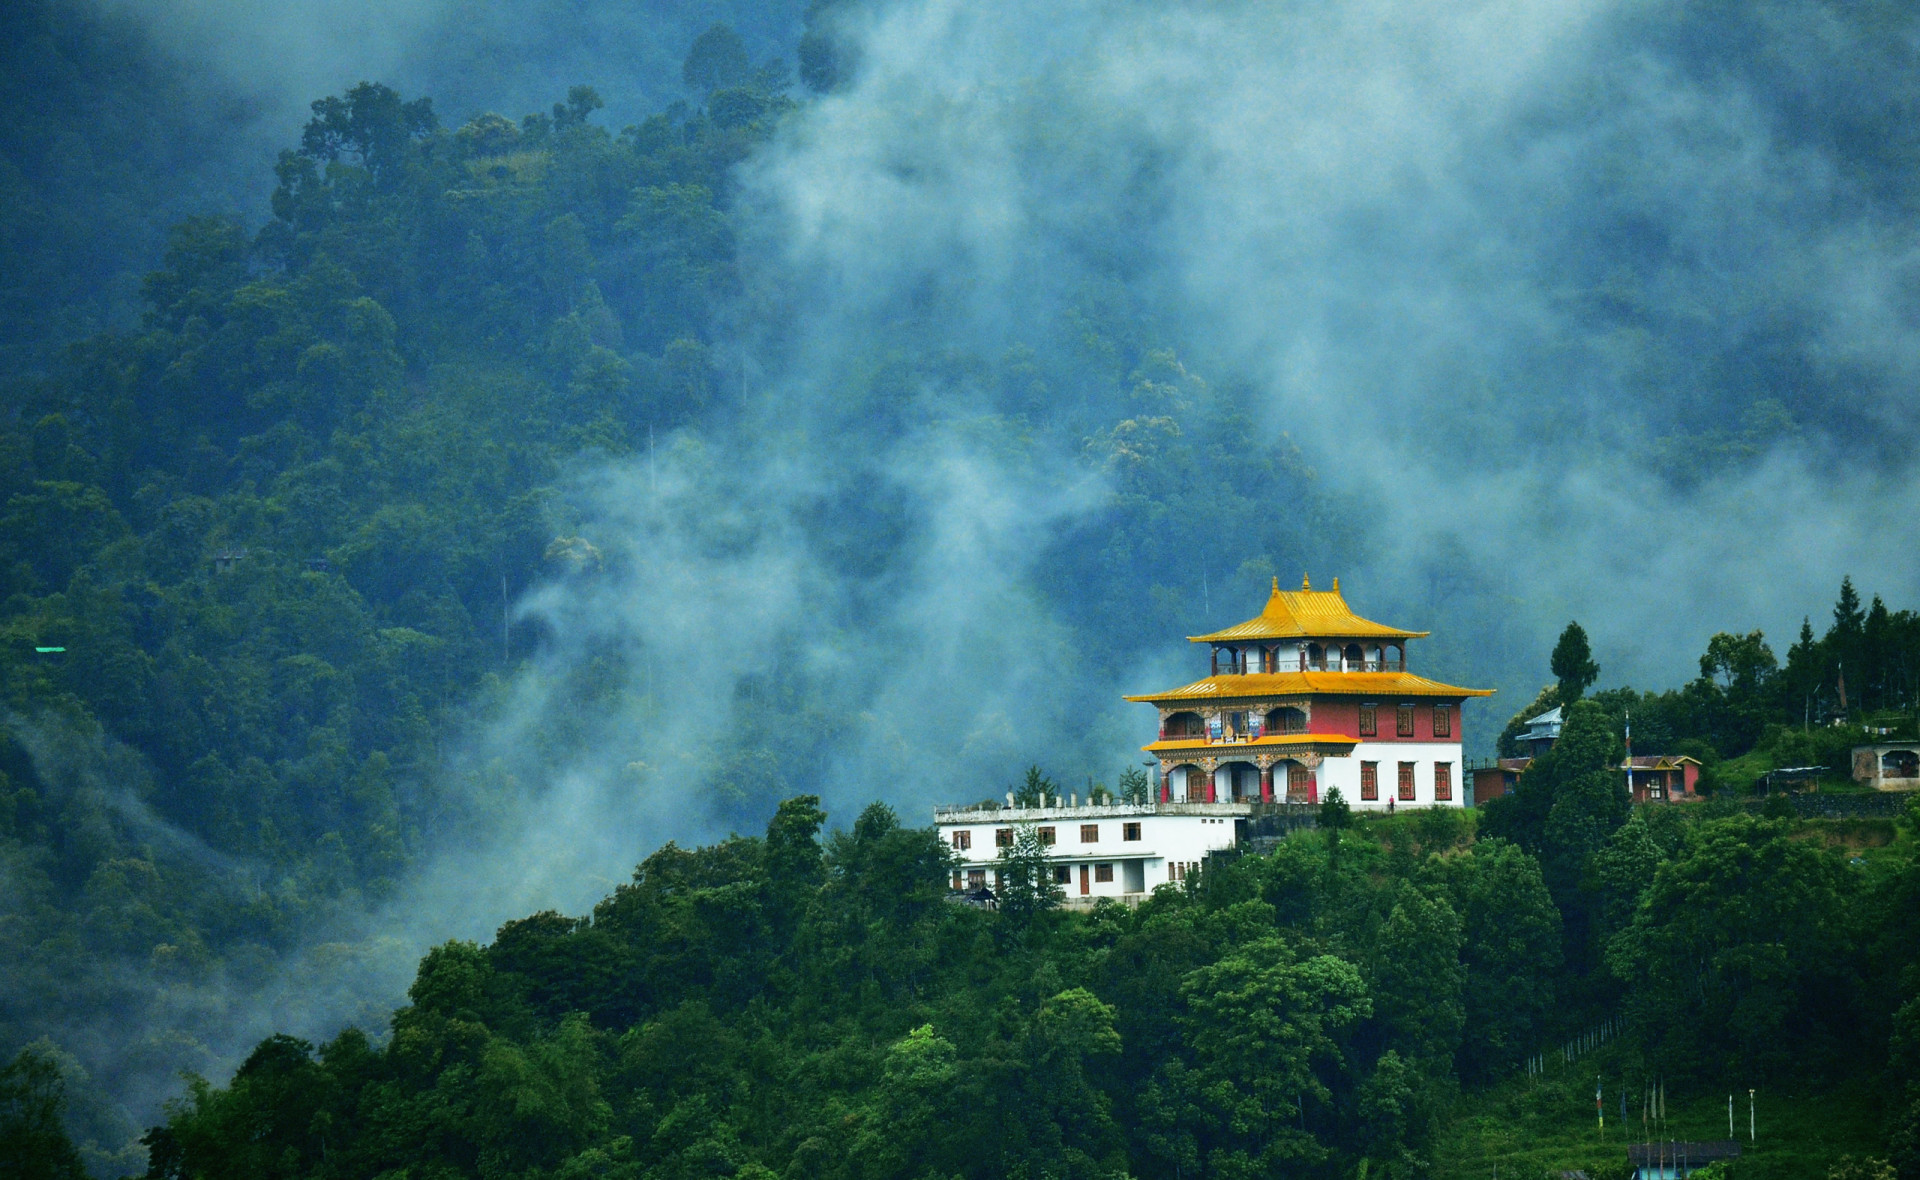 <p>National Geographic has also included Sikkim on their list, a small corner of the Himalayas that often gets overlooked as a travel destination. But the region holds beautiful mountain monasteries, hiking trails, and colored festival displays that showcase the Indian state’s vibrant culture.</p><p><a href="https://www.msn.com/en-us/community/channel/vid-7xx8mnucu55yw63we9va2gwr7uihbxwc68fxqp25x6tg4ftibpra?cvid=94631541bc0f4f89bfd59158d696ad7e">Follow us and access great exclusive content every day</a></p>